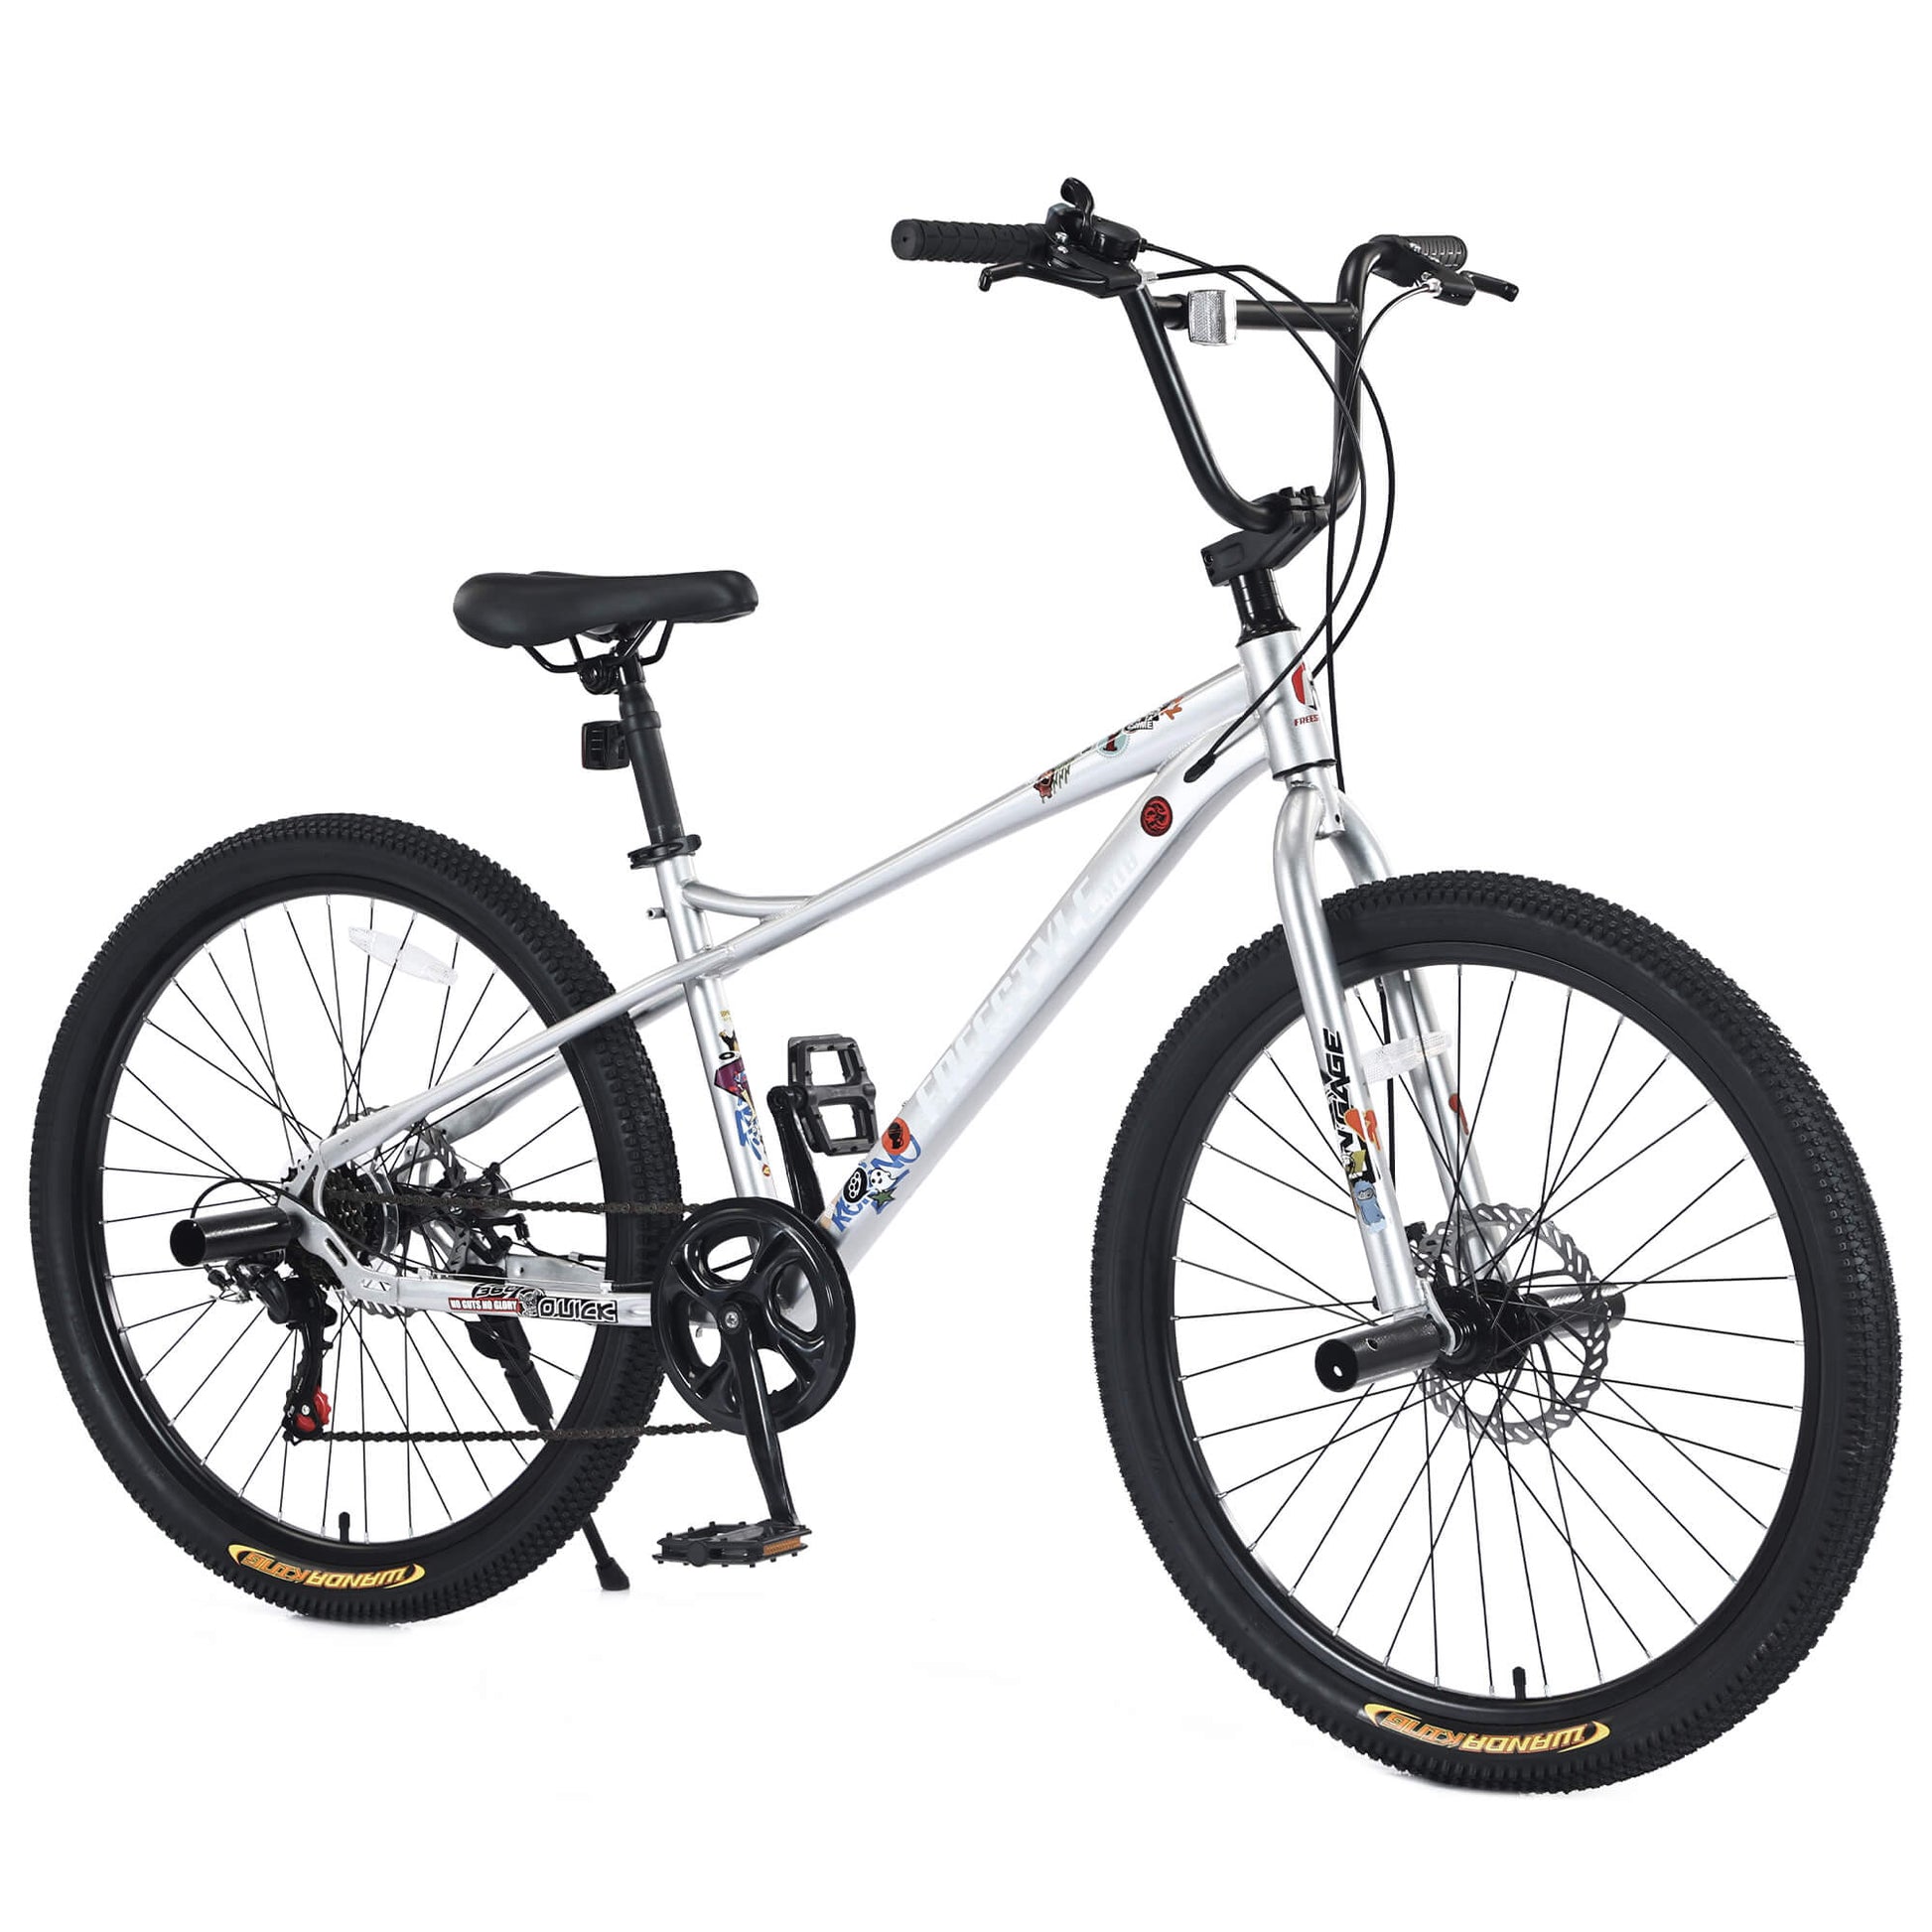 Rock-Rod 26"×2.35” White Mountain Bike For Child/Youth - Hycline 